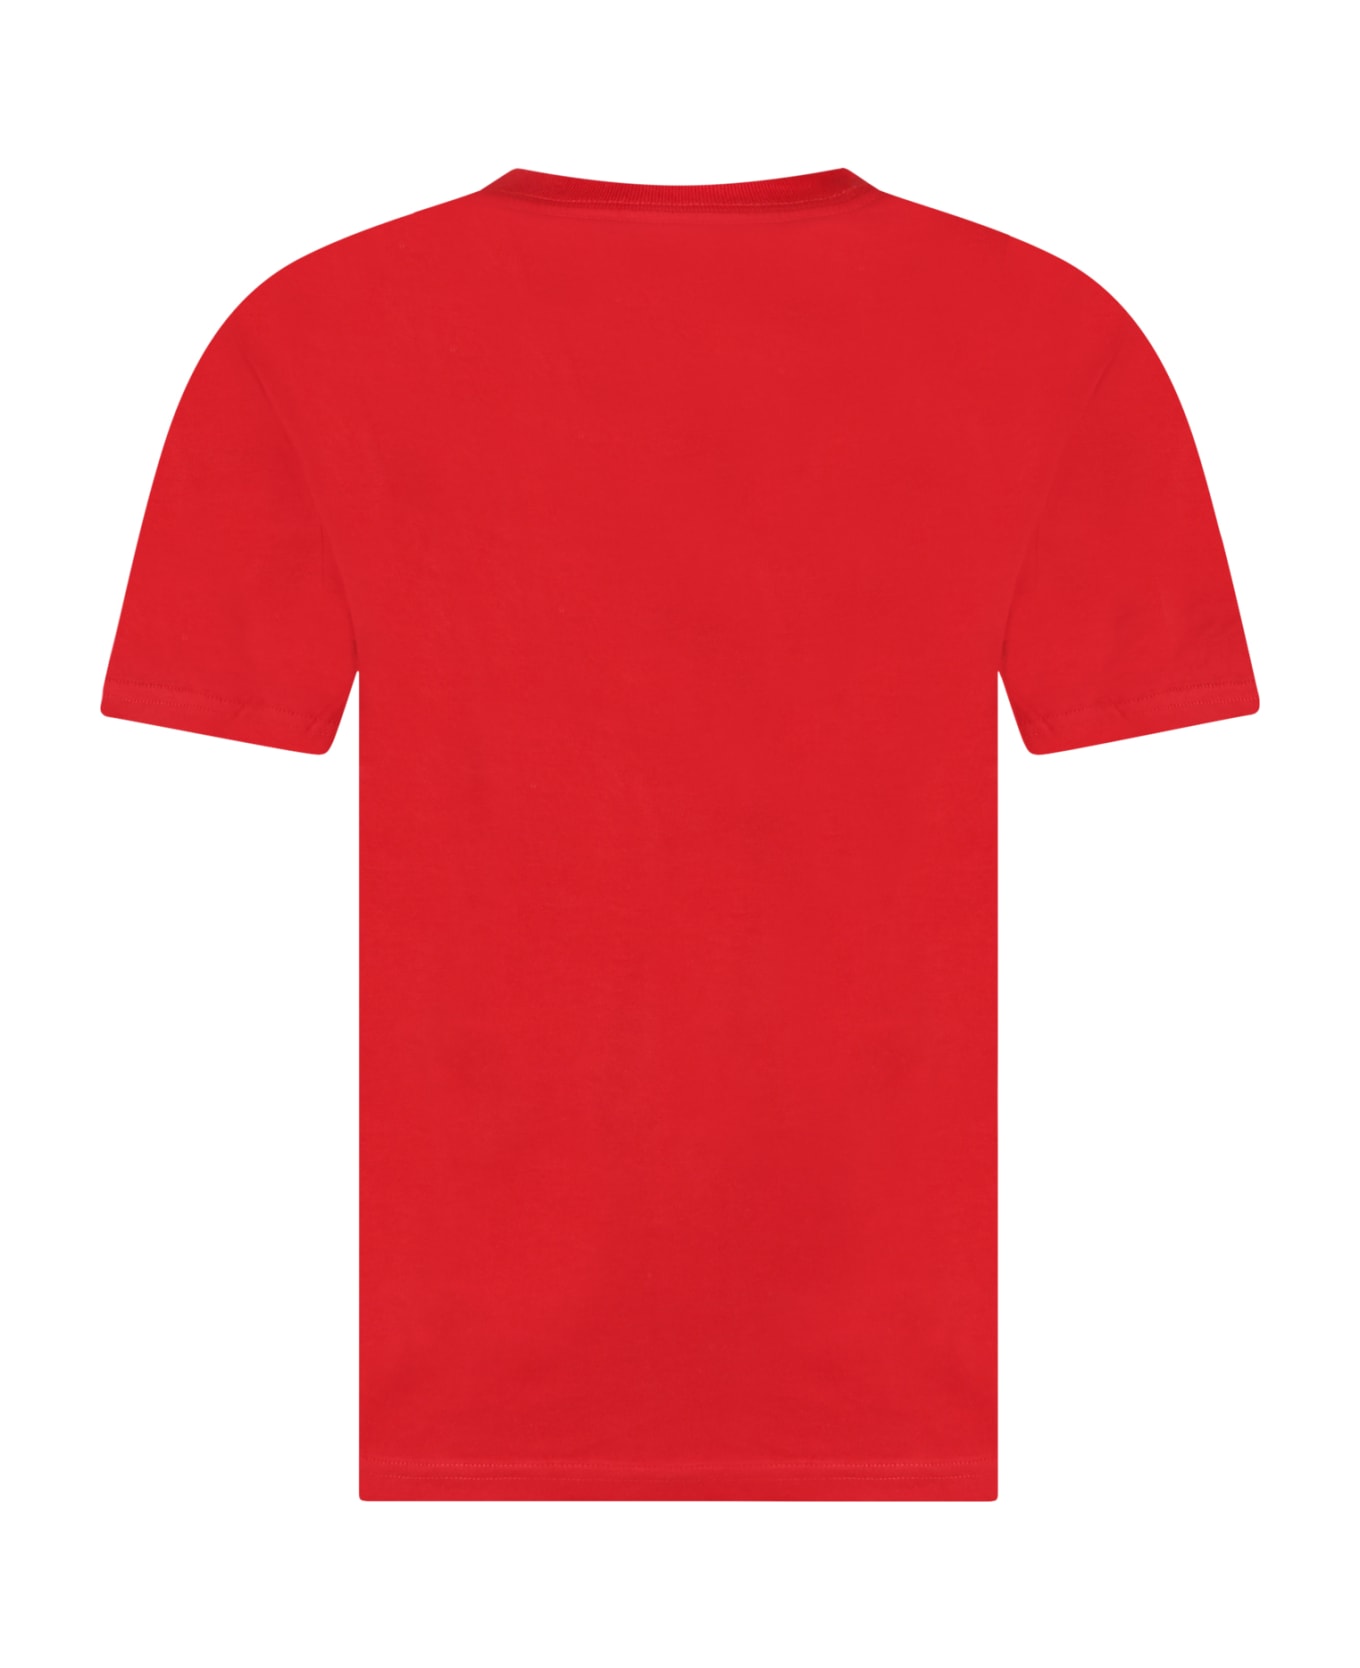 Ralph Lauren Red T-shirt For Boy With Pony Logo - Red